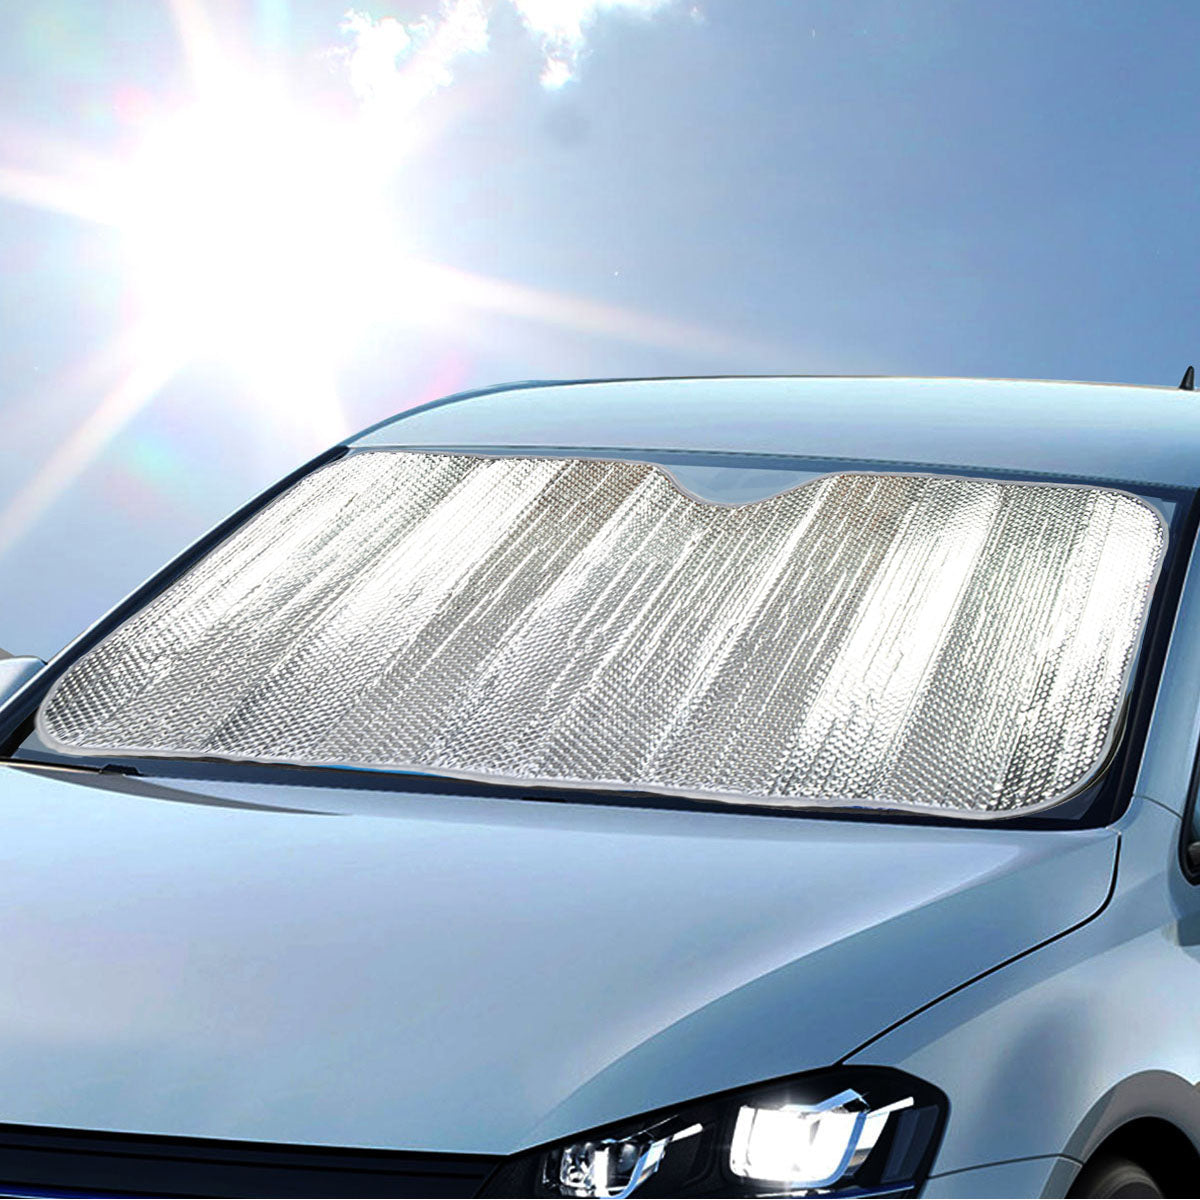 BDK Universal Windshield Car Sun Shades - Foldable Heat & UV Ray Protection - Sunshade to Keep Your Vehicle Cool and Damage Free, Easy to Use, Fits Windshields of Various Sizes - 58 x 24 in